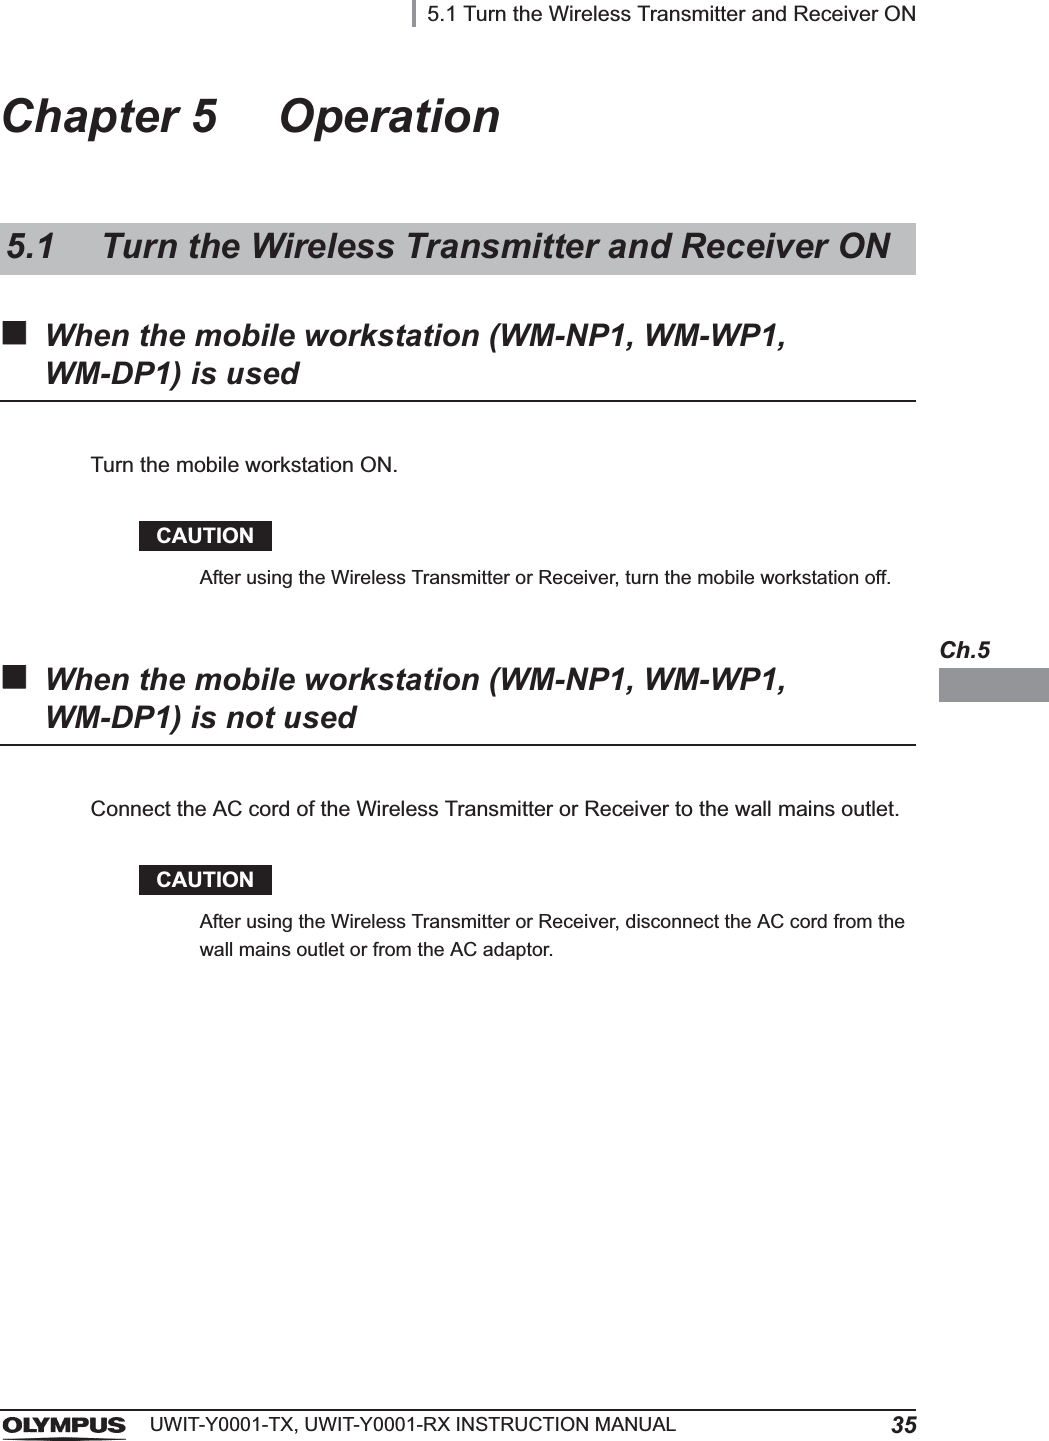 5.1 Turn the Wireless Transmitter and Receiver ON35UWIT-Y0001-TX, UWIT-Y0001-RX INSTRUCTION MANUALCh.5Chapter 5 OperationWhen the mobile workstation (WM-NP1, WM-WP1, WM-DP1) is usedCAUTIONAfter using the Wireless Transmitter or Receiver, turn the mobile workstation off.When the mobile workstation (WM-NP1, WM-WP1, WM-DP1) is not usedCAUTIONAfter using the Wireless Transmitter or Receiver, disconnect the AC cord from the wall mains outlet or from the AC adaptor.5.1 Turn the Wireless Transmitter and Receiver ONTurn the mobile workstation ON.Connect the AC cord of the Wireless Transmitter or Receiver to the wall mains outlet.